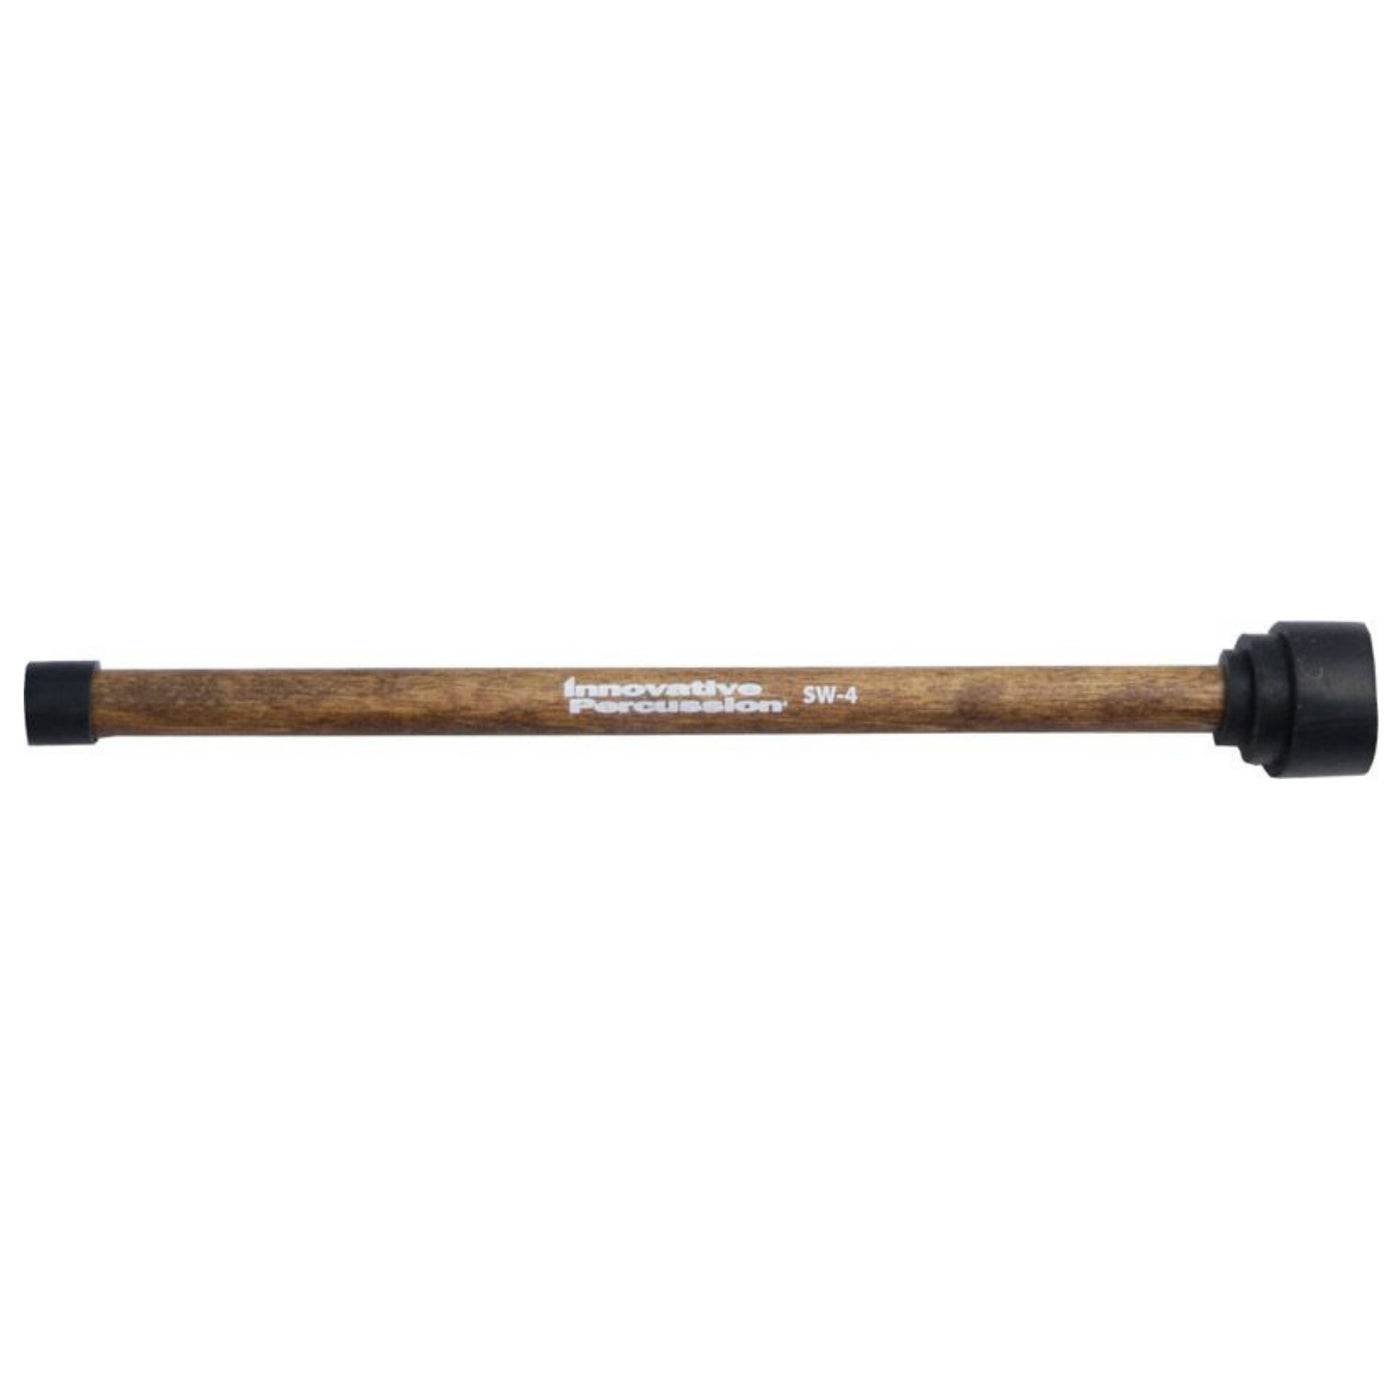 Innovative Percussion SW-4 Drum Mallet